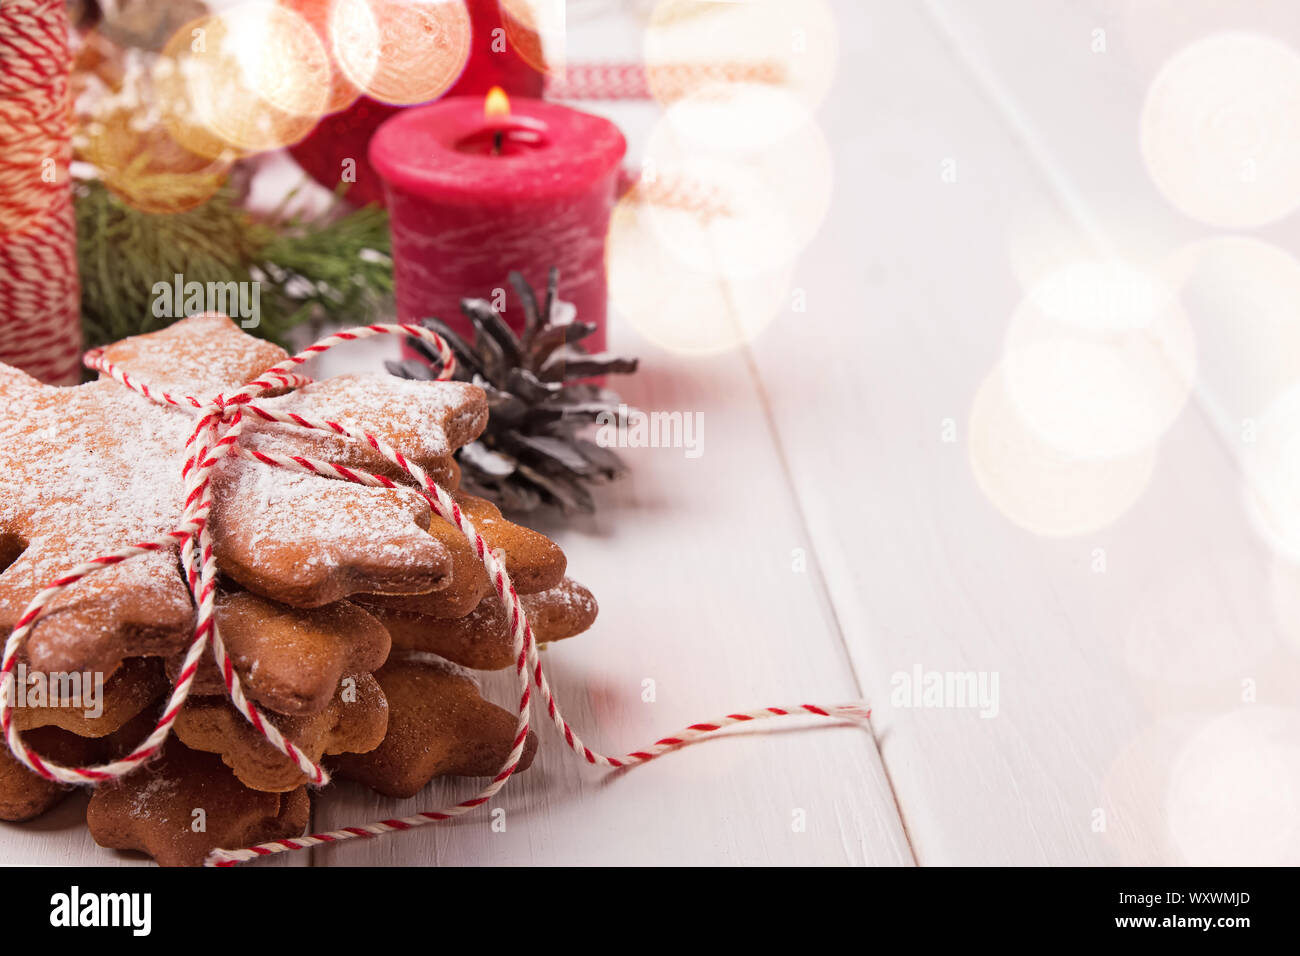 Stack of snowflake shaped cookies powdered with icing sugar close-up on the table with Christmas decor Stock Photo